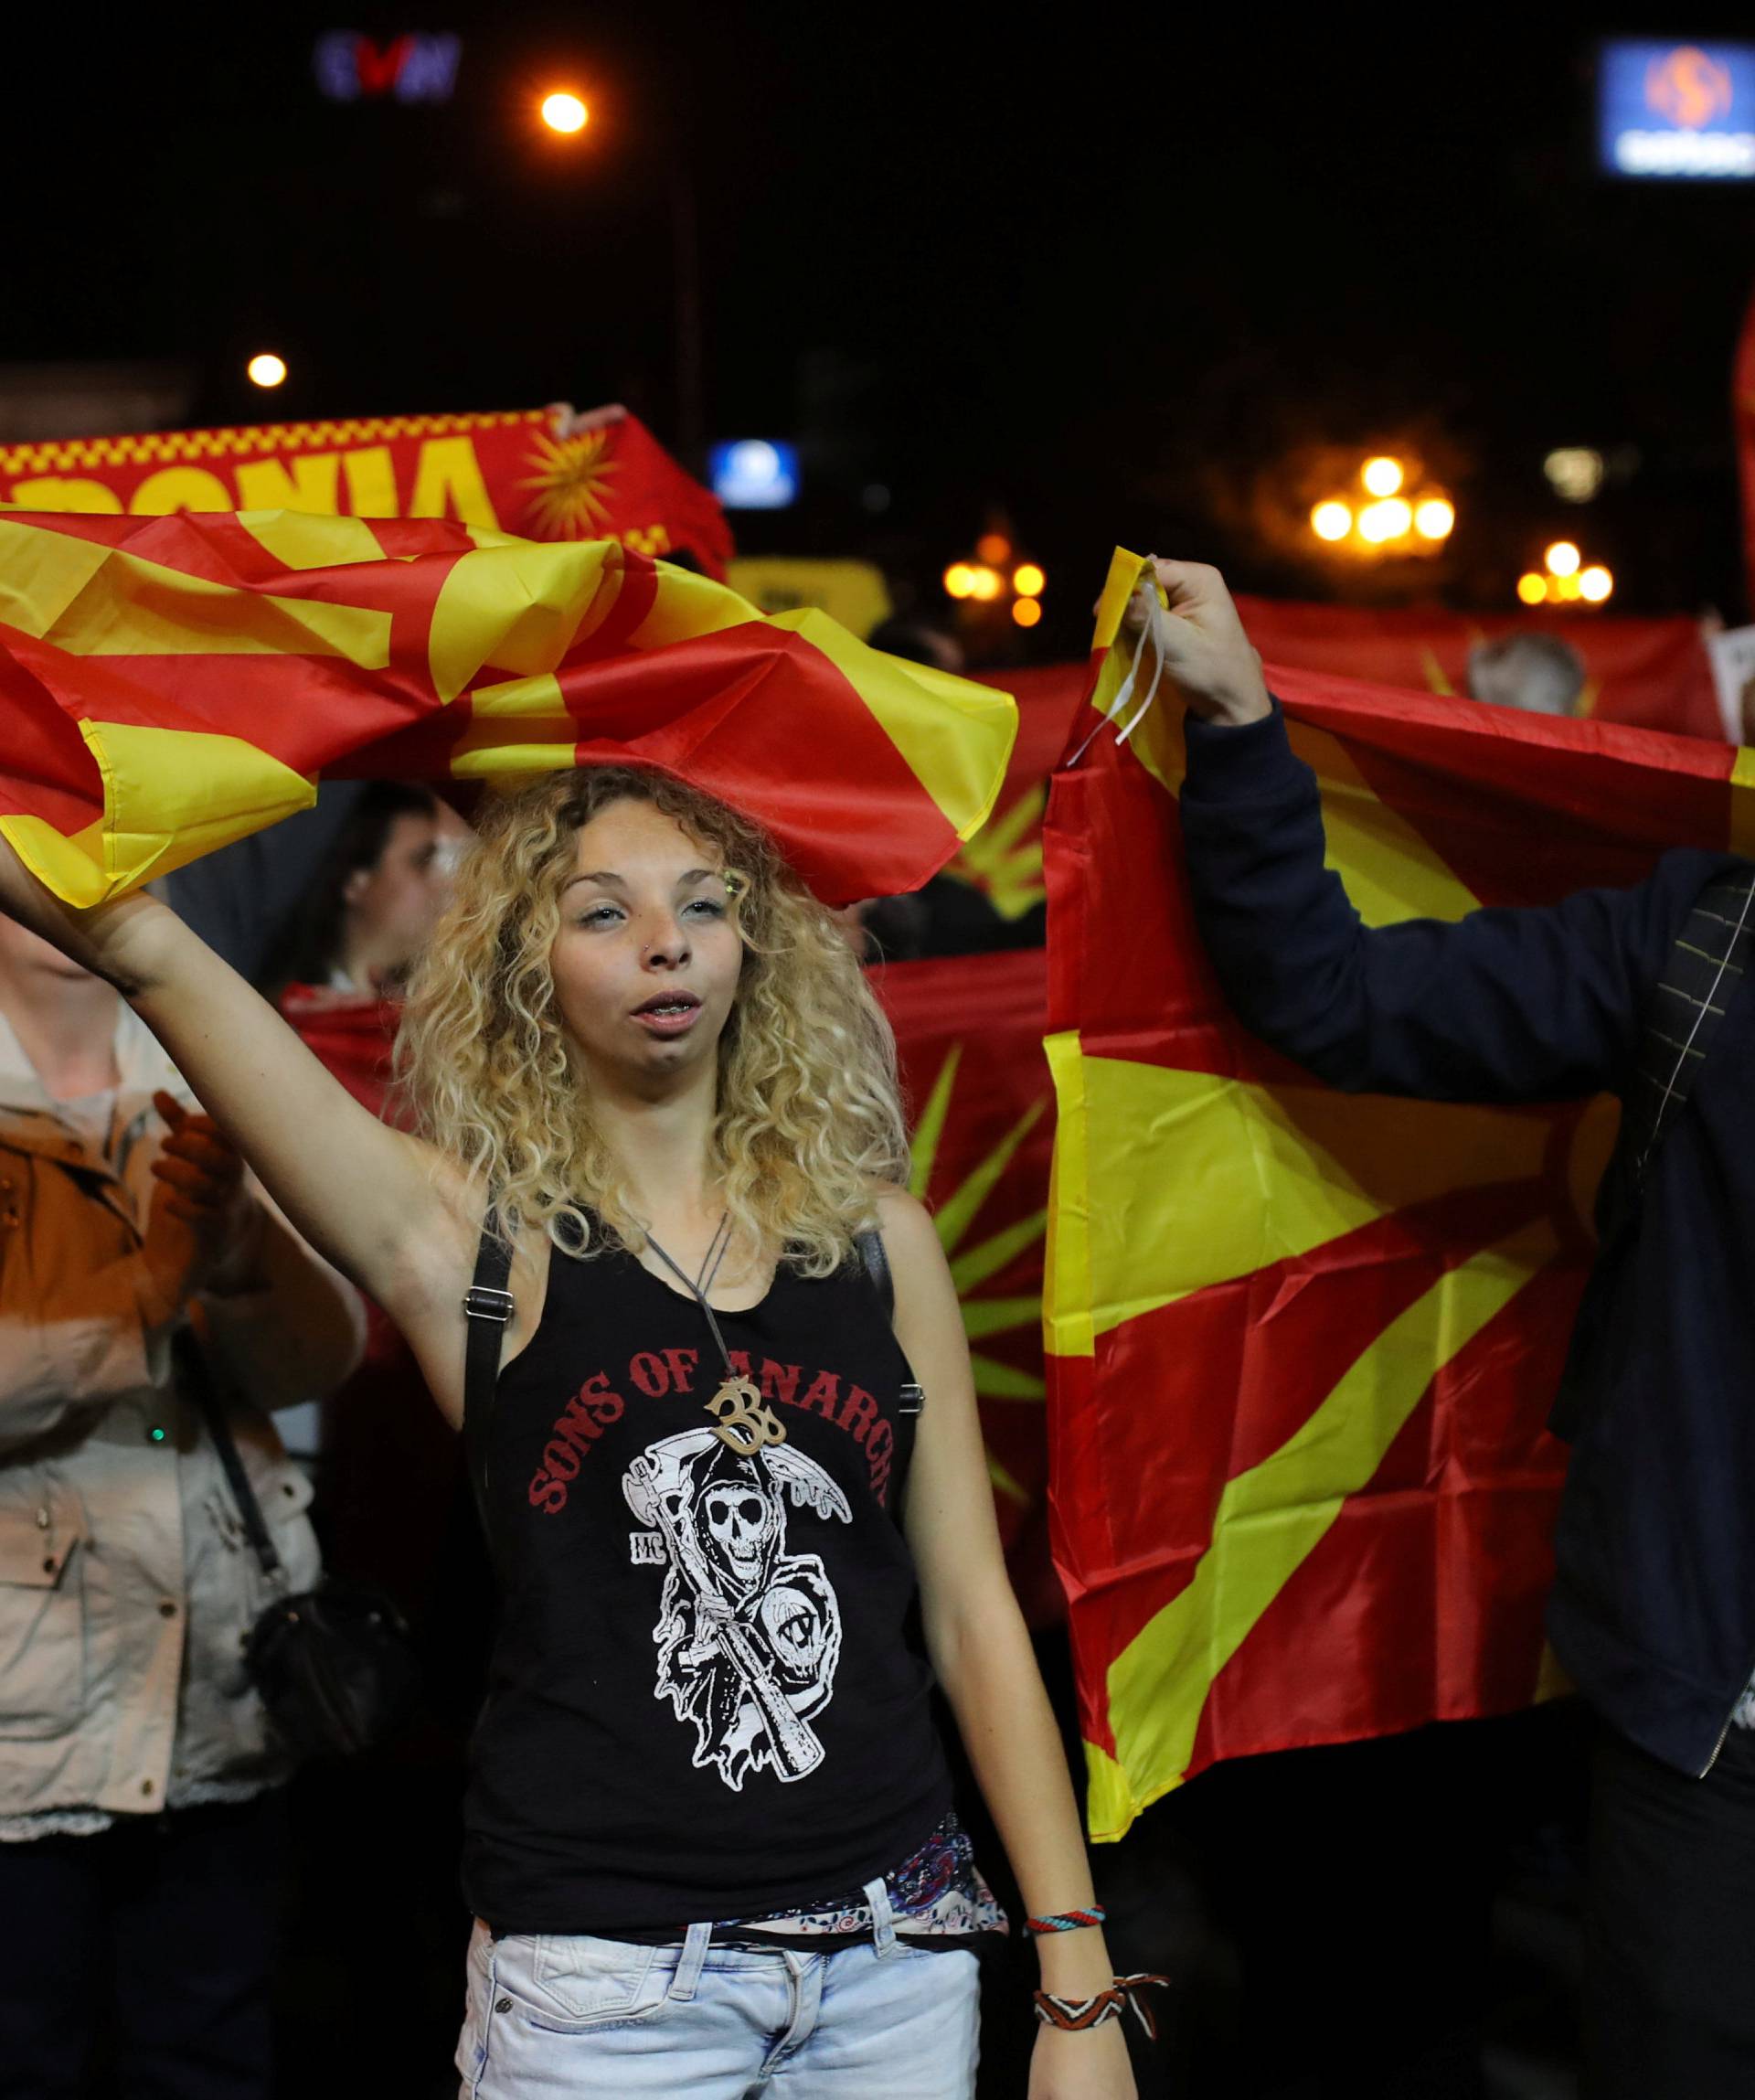 Protesters shout out slogans about boycott referendum on changing the country's name that would open the way for it to join NATO and the European Union in Skopje